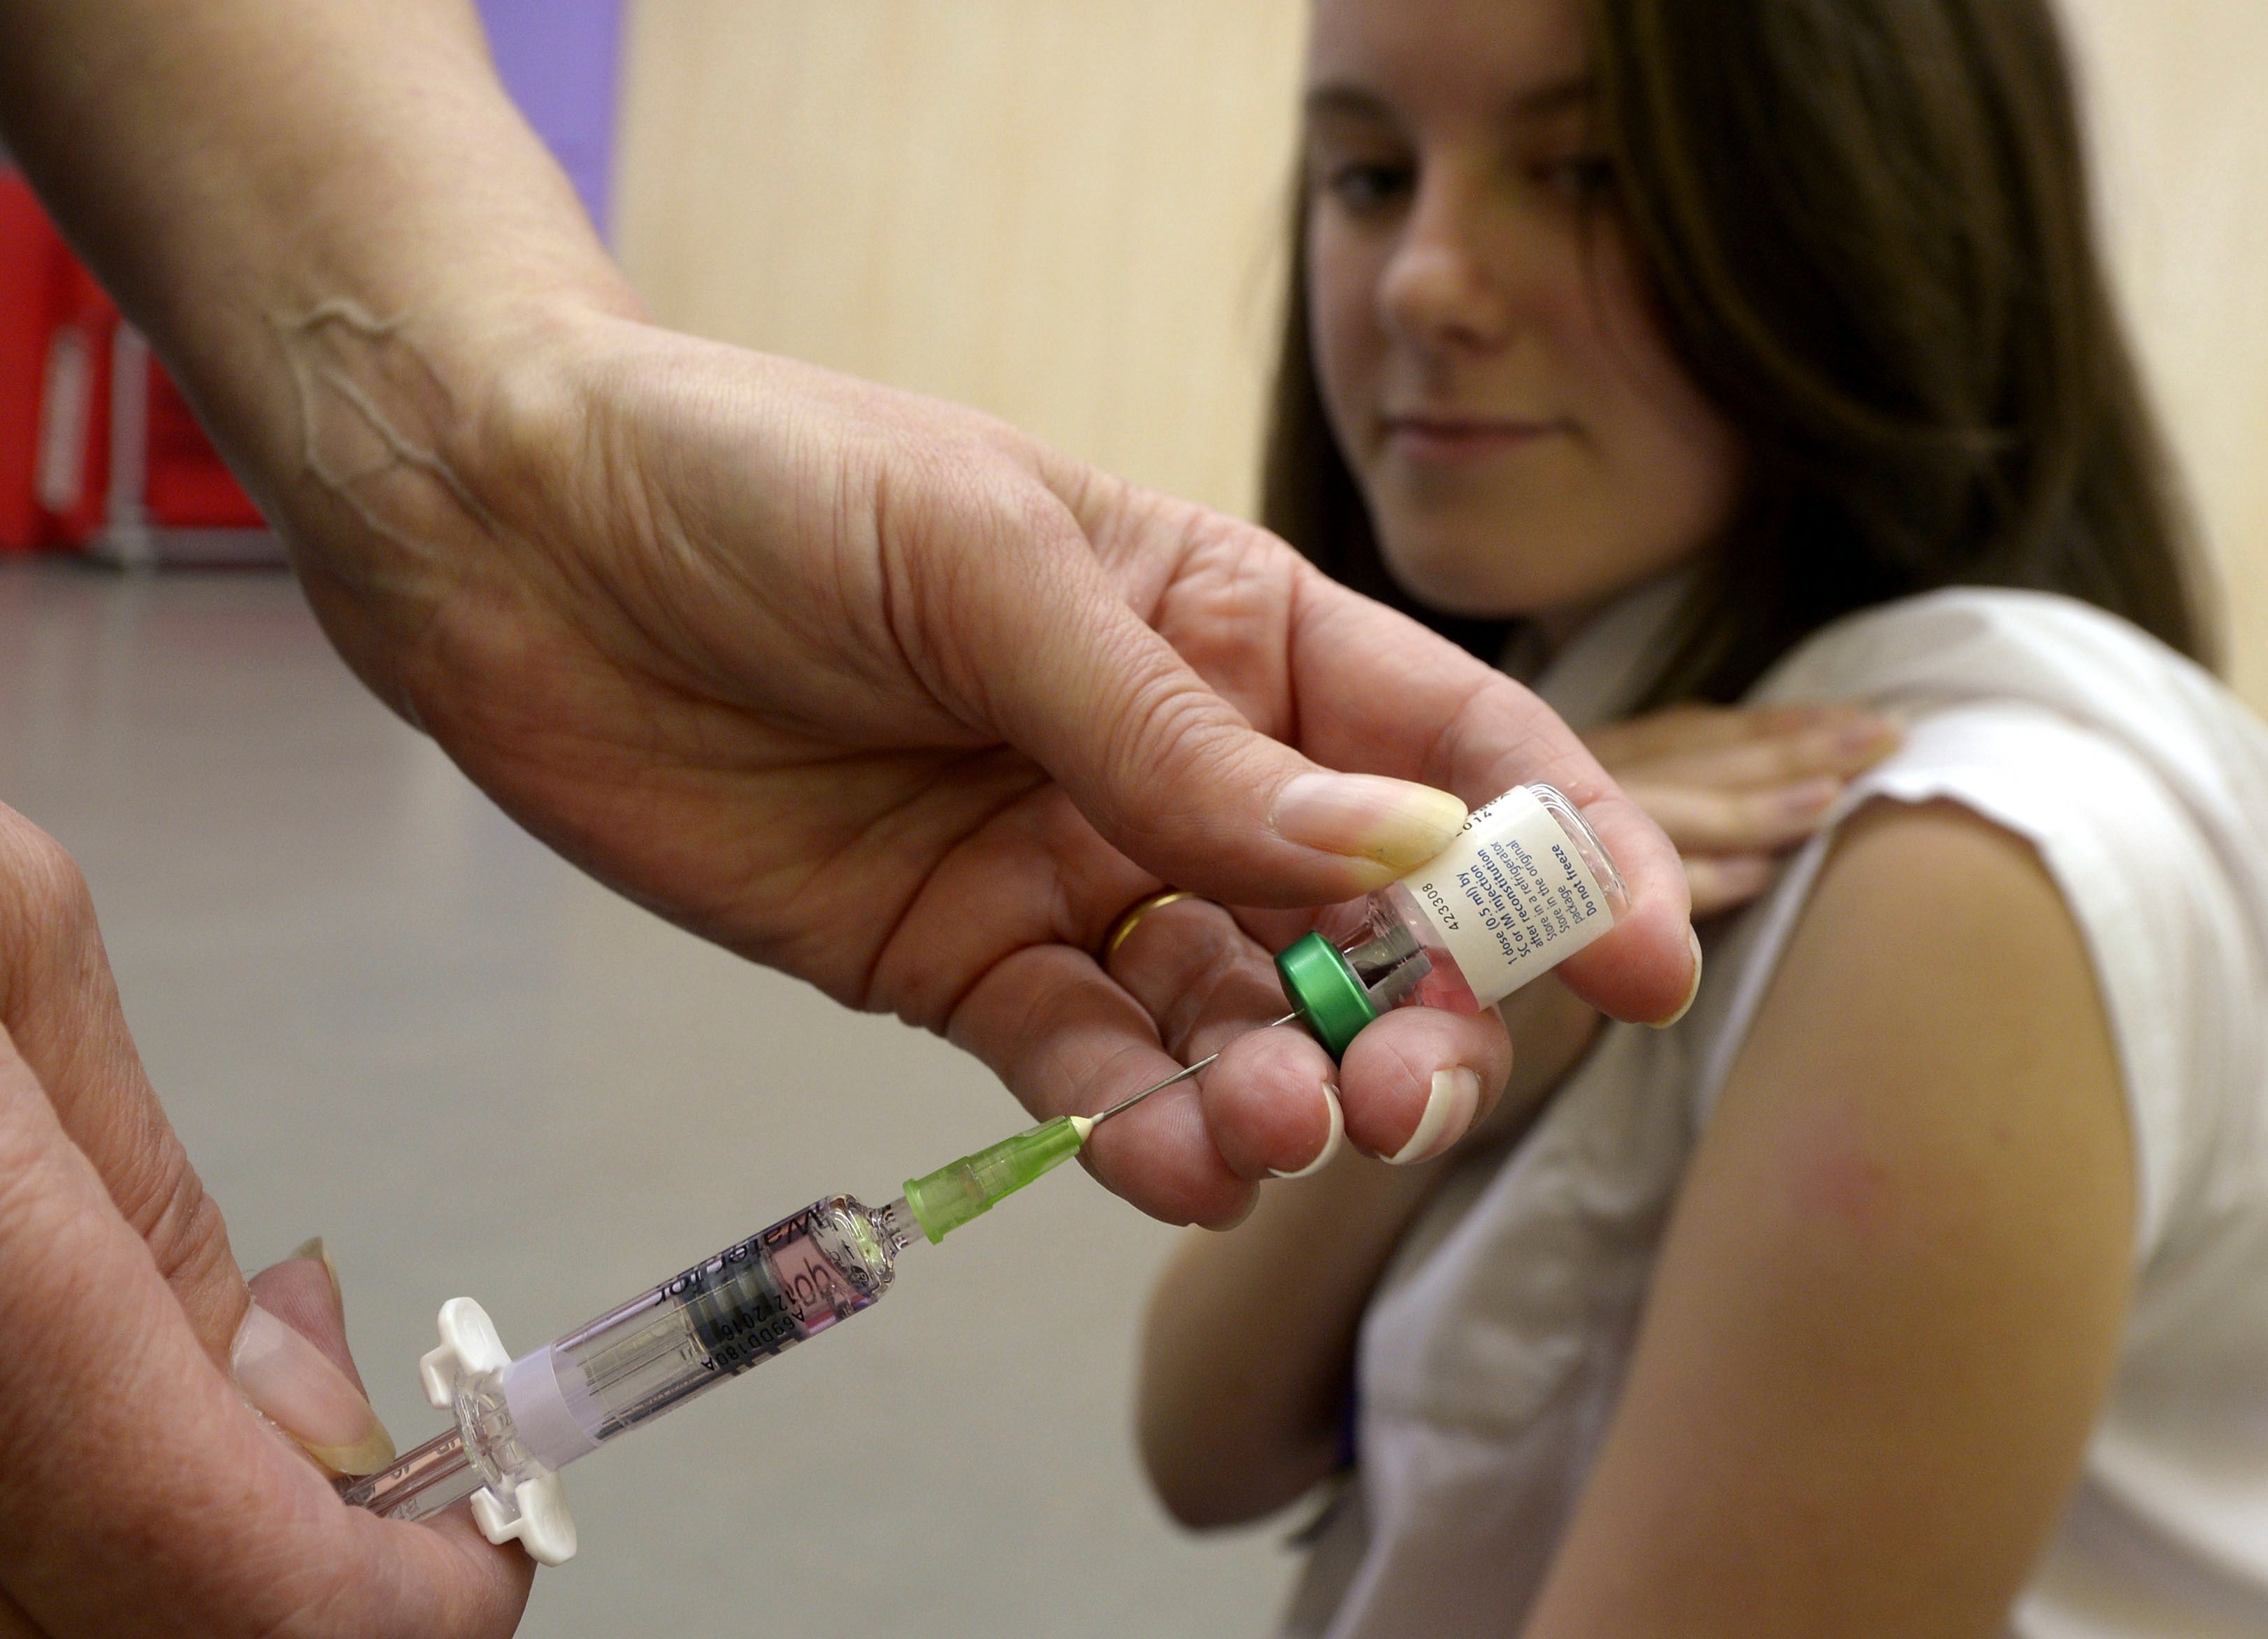 Health experts have urged parents to get their children vaccinated against measles